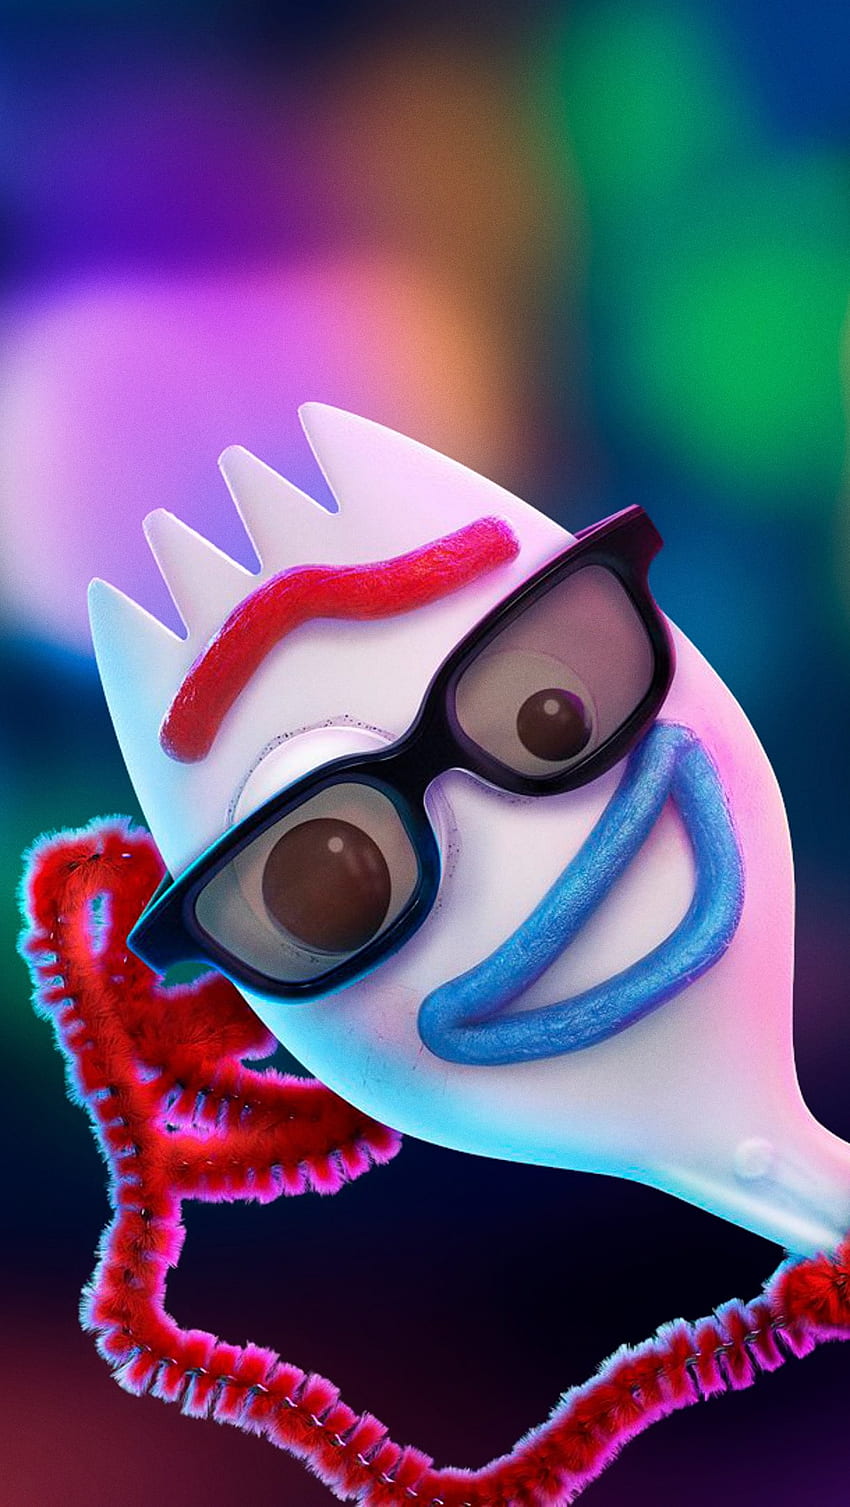 Forky, Toy Story 4's New Character, is Already a Meme